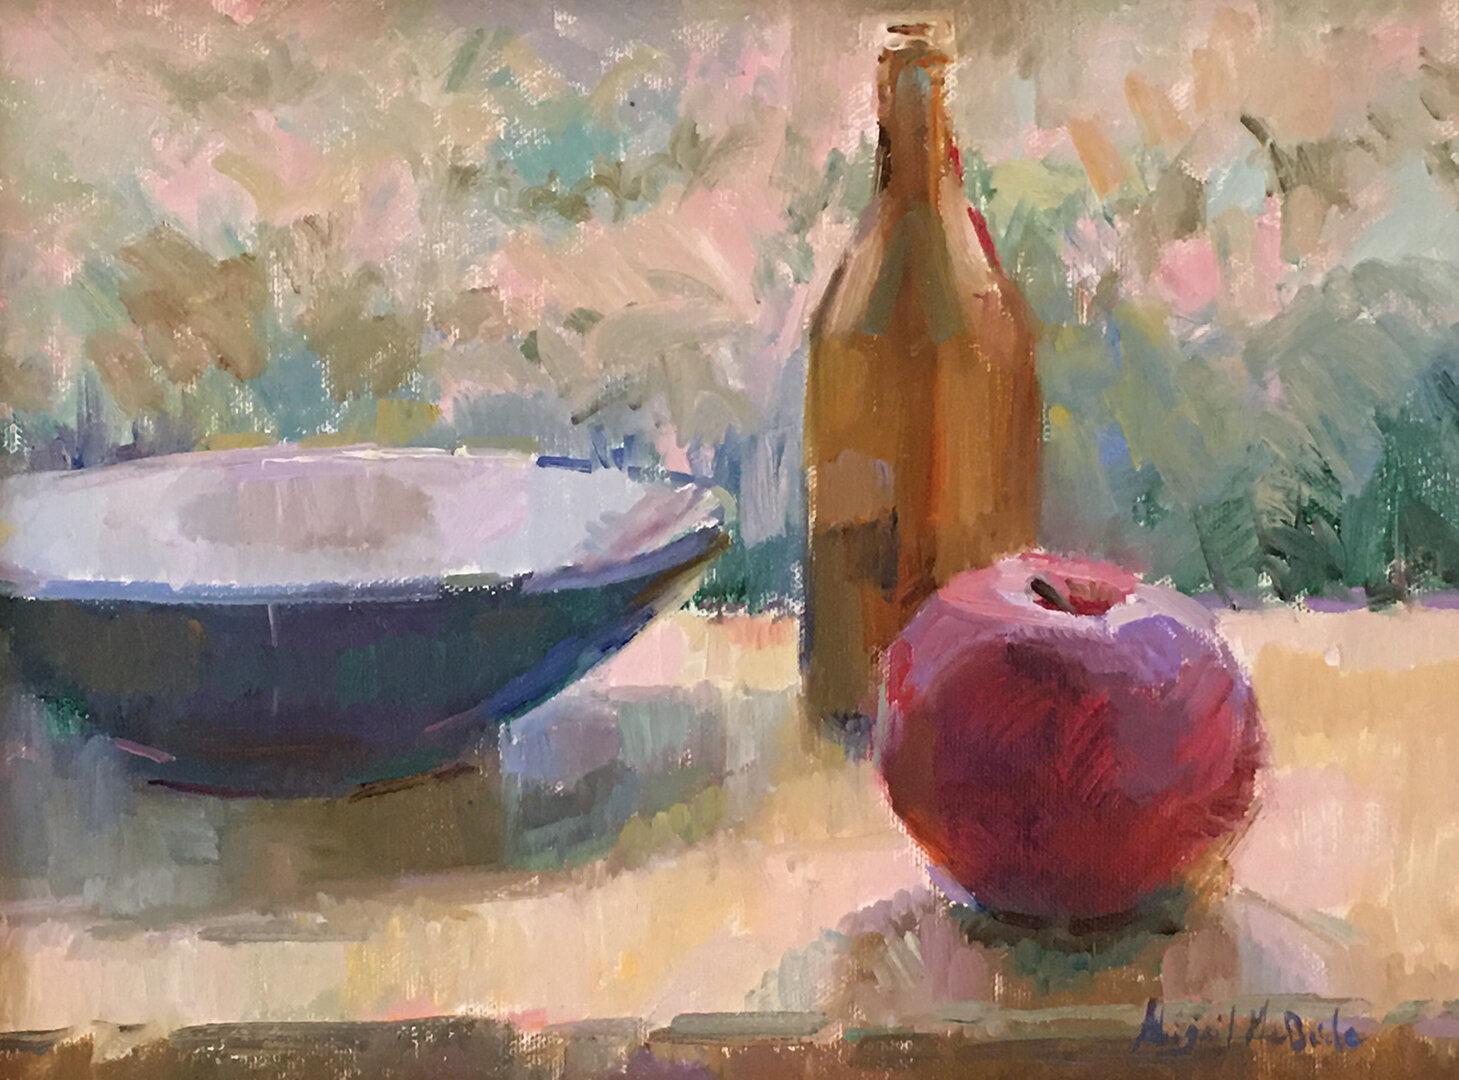 From the outdoors to interesting people, the subjects of artist Abigail McBride are broad in scope. Her work will be on exhibit until September 5 at McBride Gallery in Annapolis.